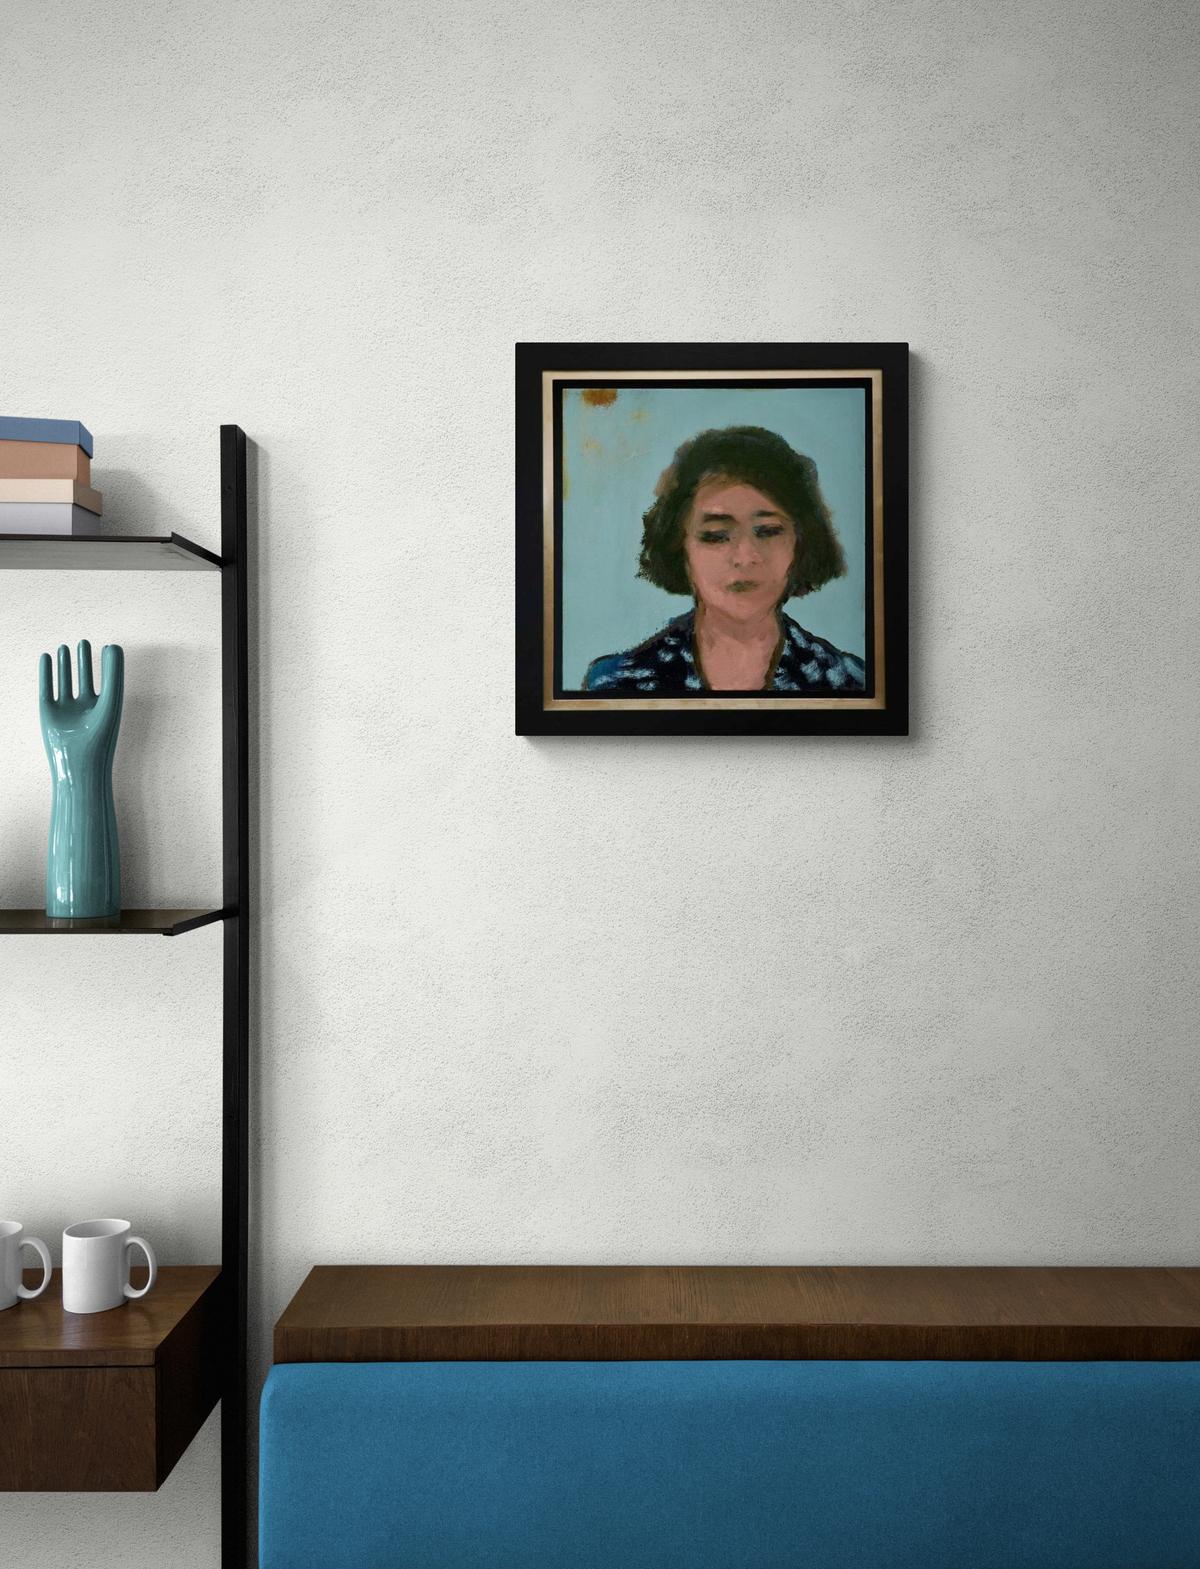 Woman with Print Dress - small teal blue, female portrait figurative still life For Sale 1